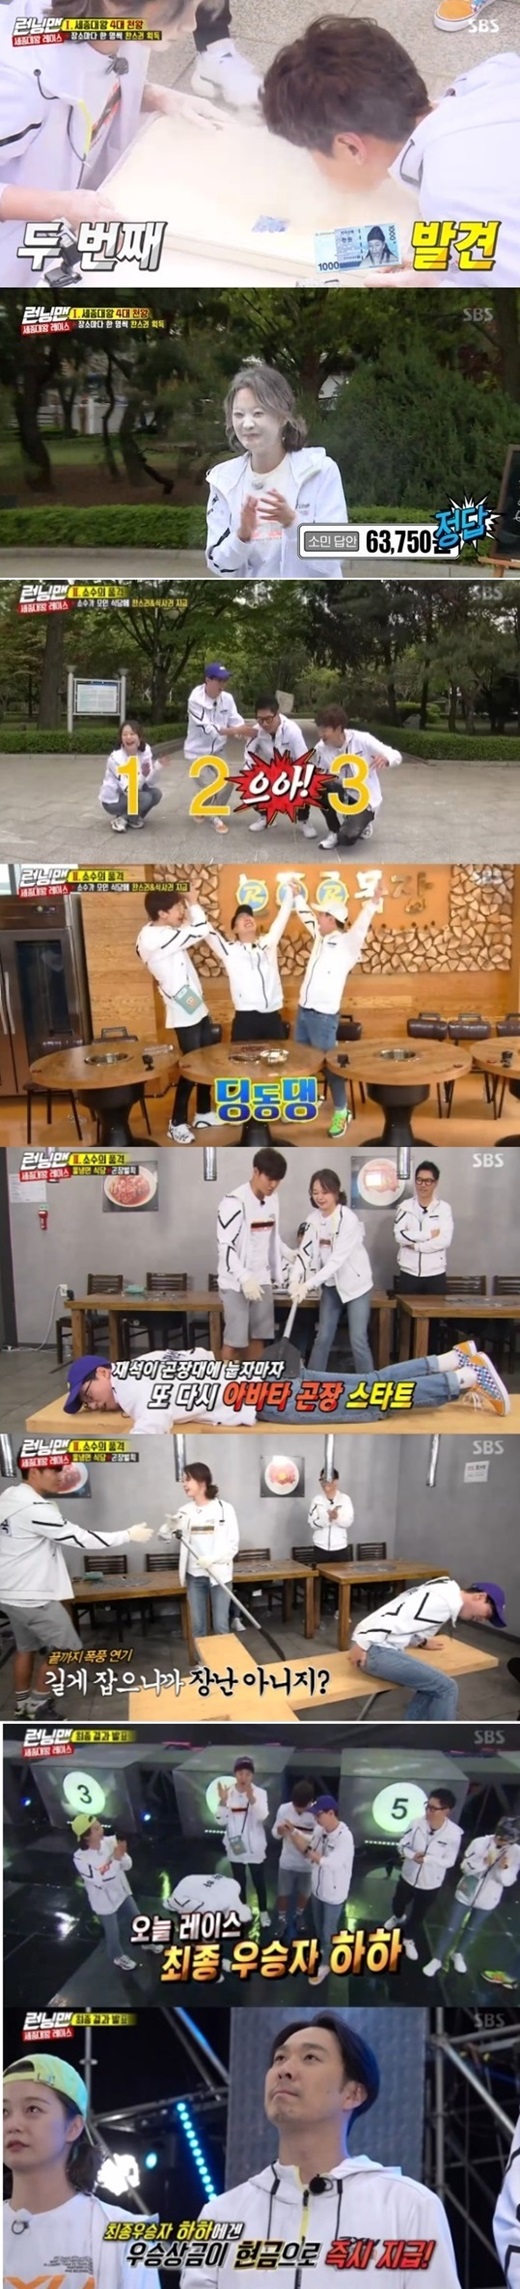 SBS Running Man maintained its top spot in the same time zone of the overwhelming 2049 ratings due to a steep rise in ratings.According to Nielsen Korea, a ratings agency, Running Man, which was broadcast on the 12th, ranked first in the same time zone with a 3.5 percent increase in target audience rating of 2049, an important indicator of major advertising officials, by 0.8 percent from last week (based on the second part of the audience rating of households in the Seoul Capital Area).The average audience rating also rose vertically, recording 4.5% in the first part and 6.9% in the second part (based on the audience rating of households in the Seoul Seoul Capital Area), and the highest audience rating per minute rose to 7.8%.The broadcast was decorated with a pleasant Sejong the Greats Mysterious Race, and the fierce mission confrontation of the members toward the championship was held, and the defeat team was laughed with a fine penalty.The final mission was the complete reconquest quiz of King Sejong. The members solved various quizzes related to King Sejong in the super-sized penalty set.Yoo Jae-seok struggled, but the final two were Haha and Jeon So-min.In particular, Haha did not meet any problems until the final stage, but won the lucky championship by facing only one problem in the confrontation with Jeon So-min.The scene recorded the highest audience rating of 7.8% per minute, accounting for the best one minute.Meanwhile, Running Man will start Running Man 9th Anniversary Special Project - Running Man Fan Meeting: Running Zone Project from next week.A special event for domestic fans will be predicted to be a previous-class showdown between the production team and its members, and it is expected to be another Legend Project.